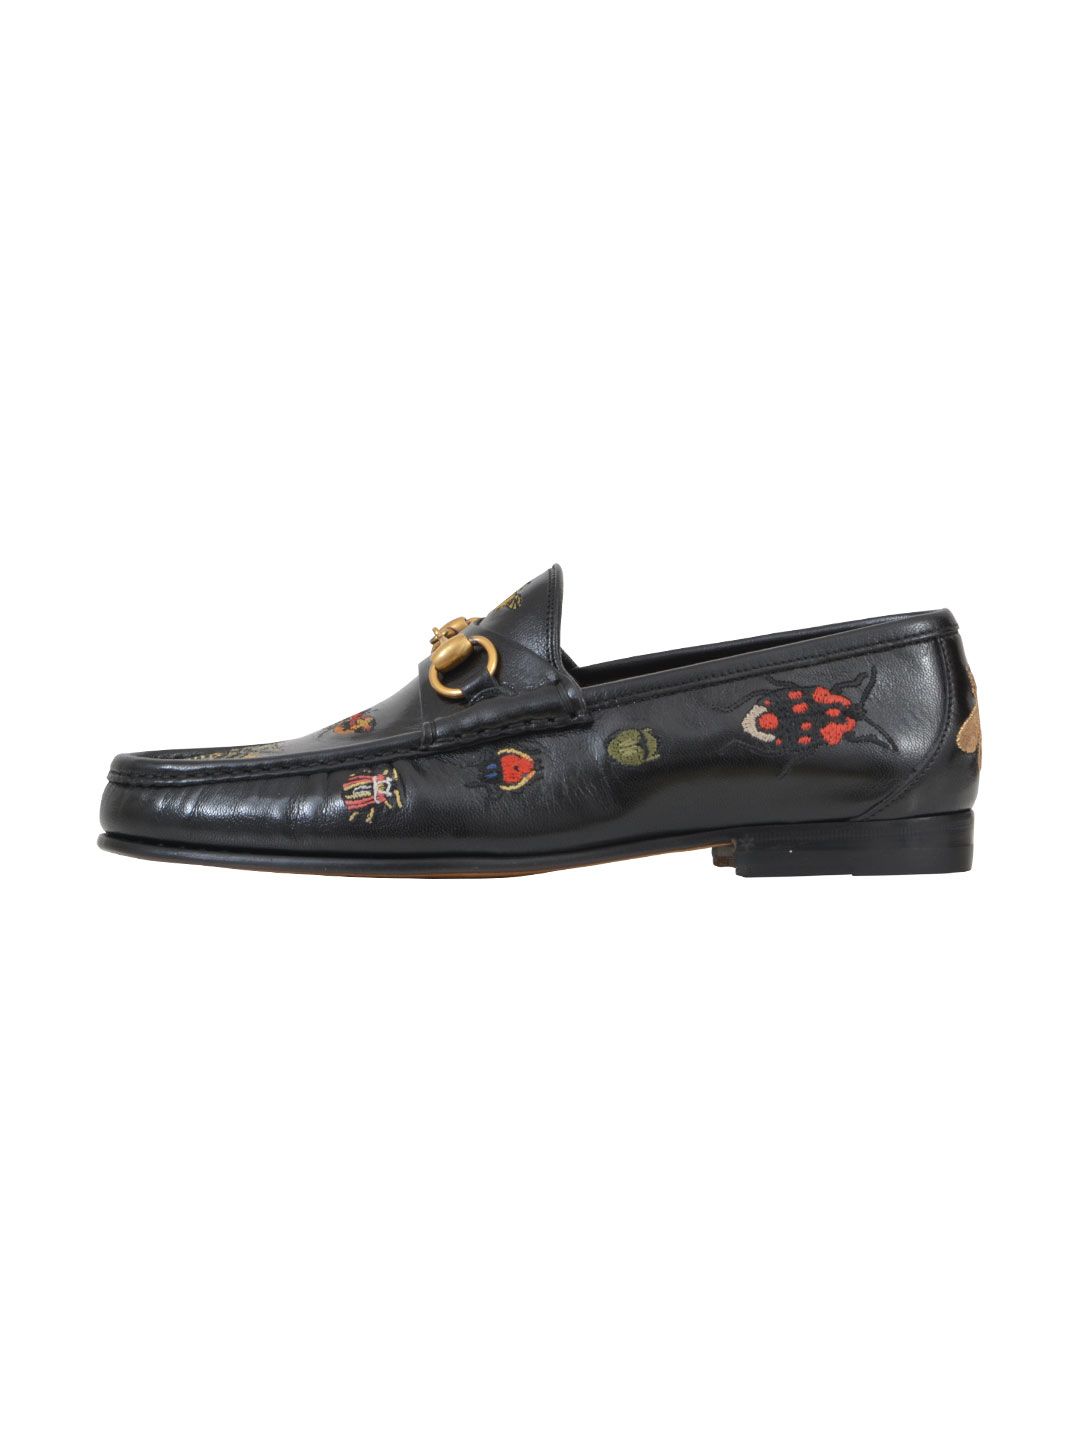 GUCCI ROOS INSECT MOTIF LEATHER MOCCASINLOAFERS, BLACK | ModeSens